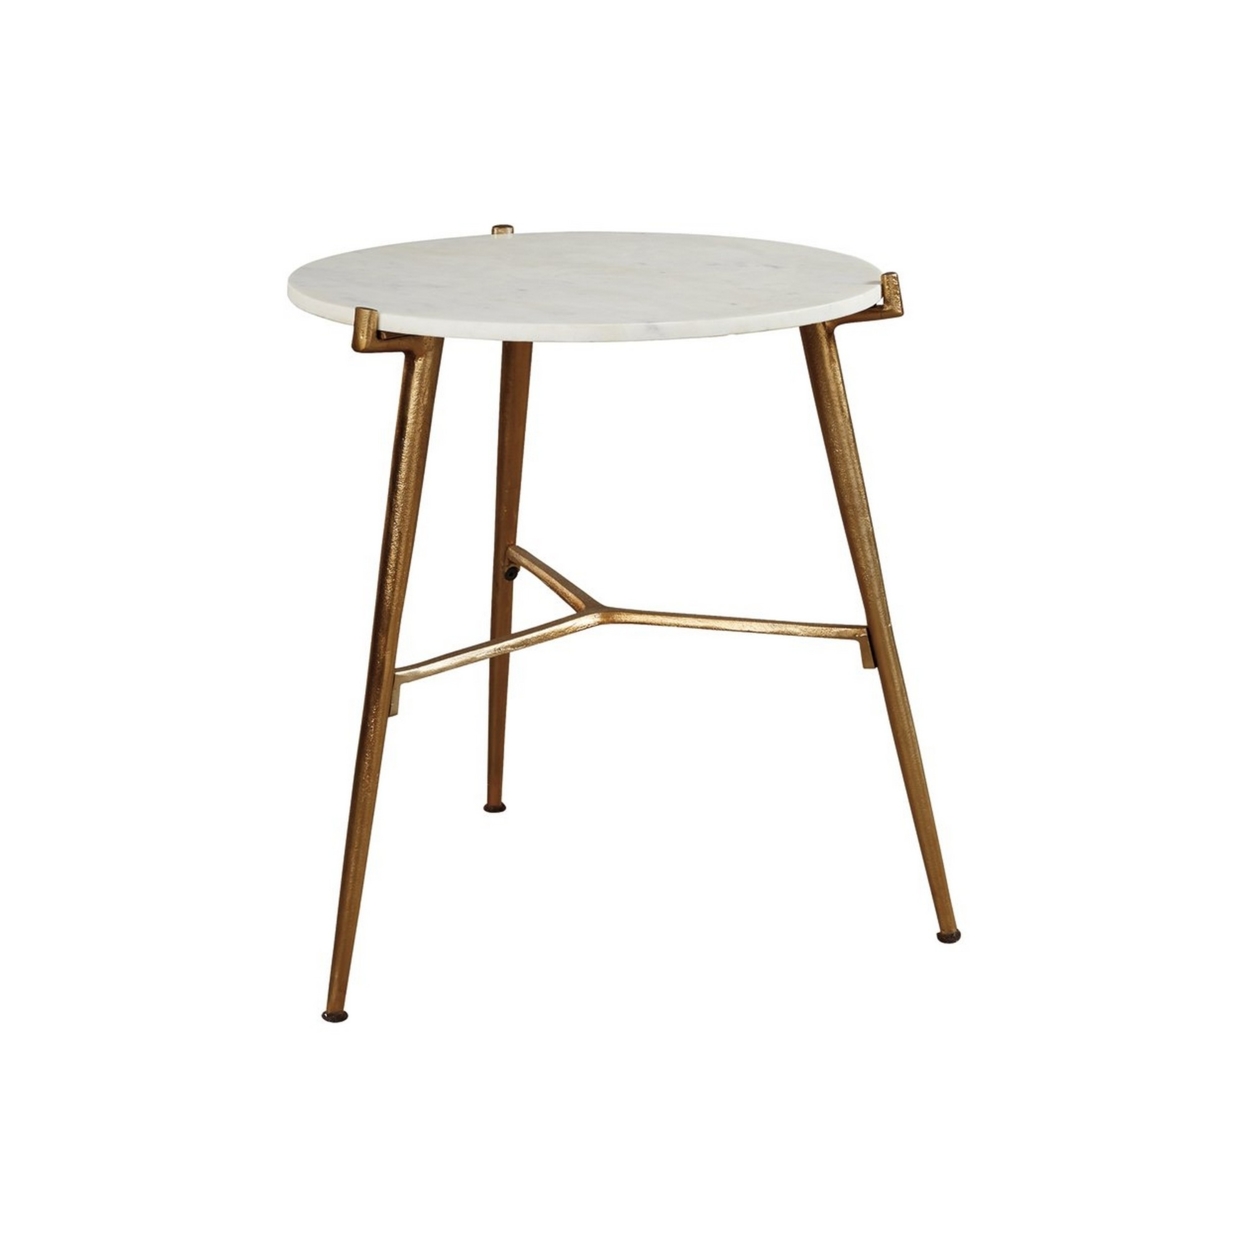 Round Marble Top Accent Table With Angled Metal Legs, Gold And White- Saltoro Sherpi